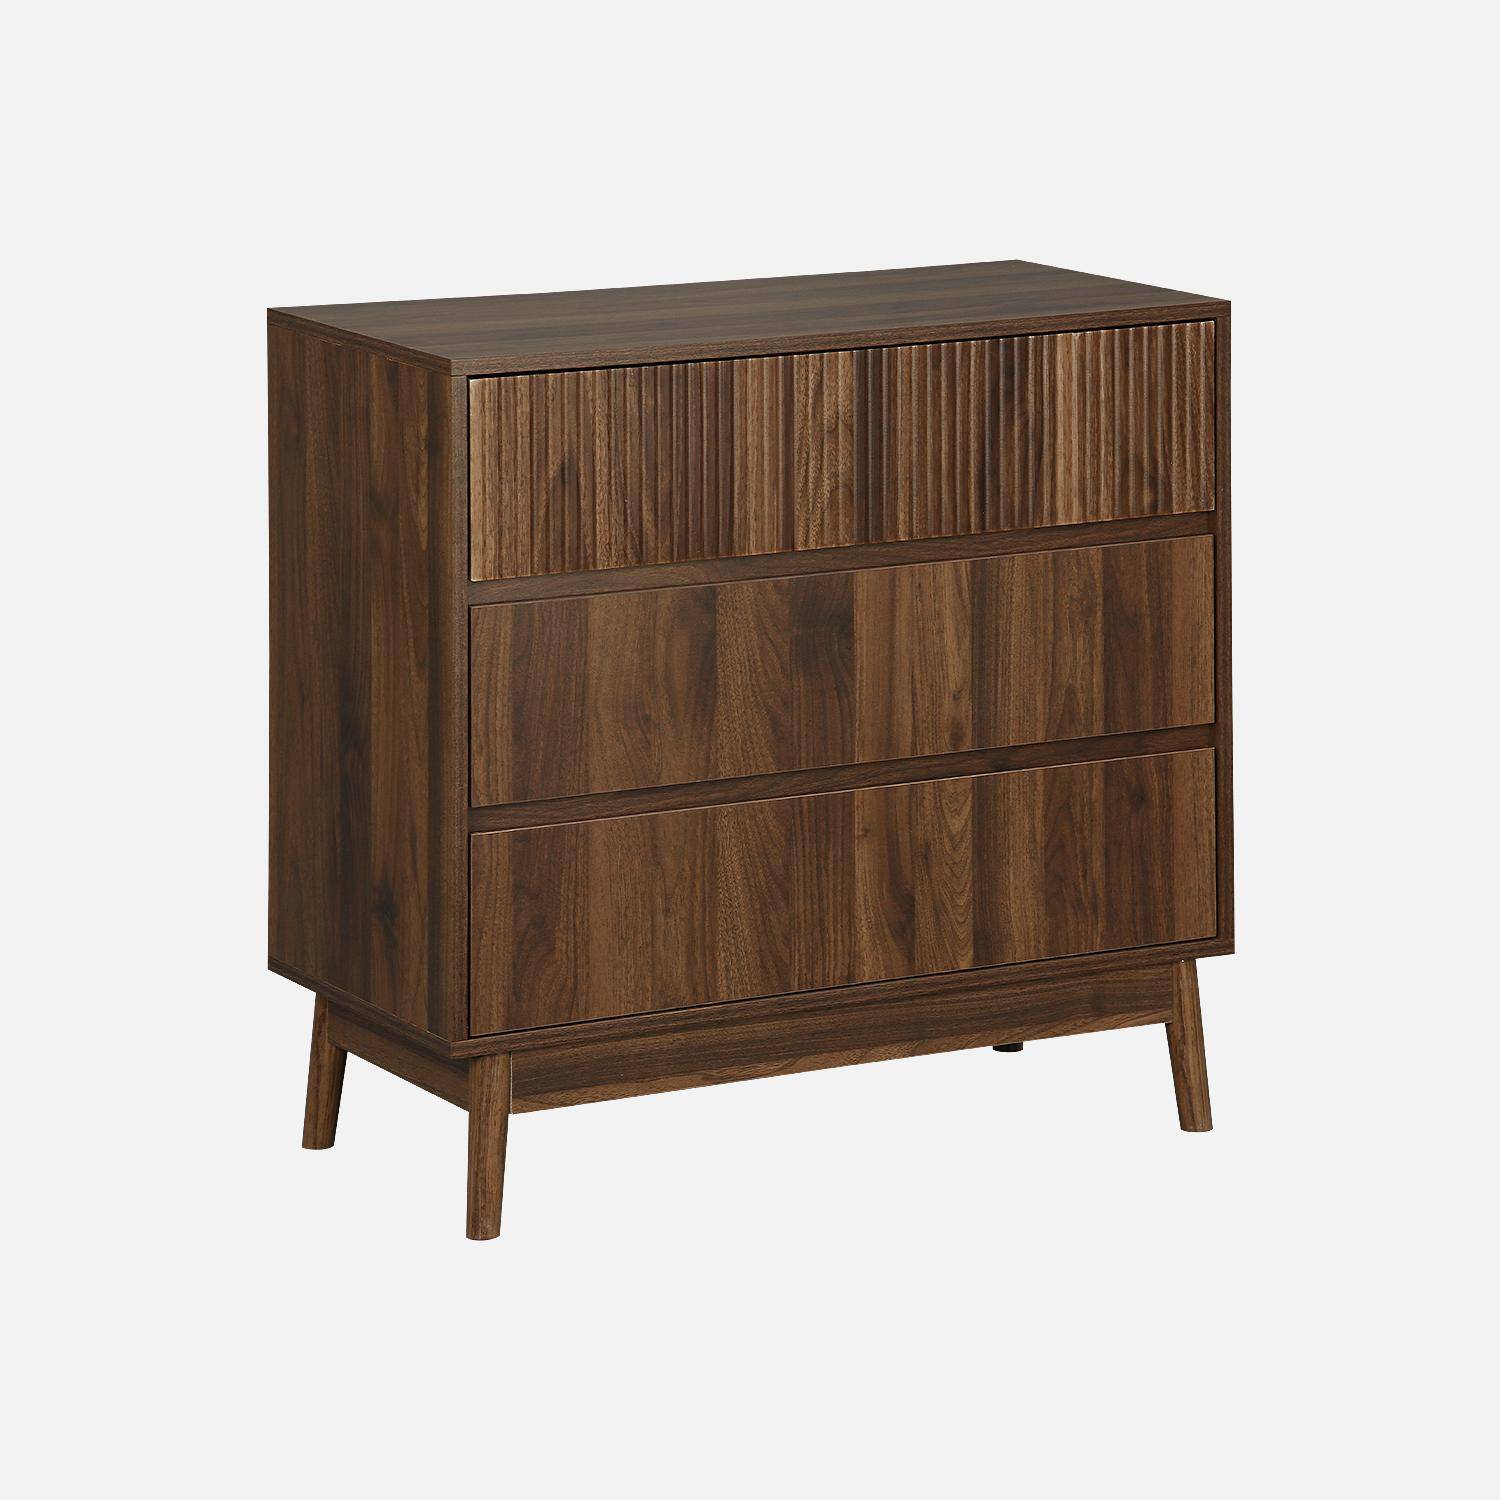 Grooved wood detail 3-drawer chest, 80x40x80cm - Linear - Dark Wood colour Photo3